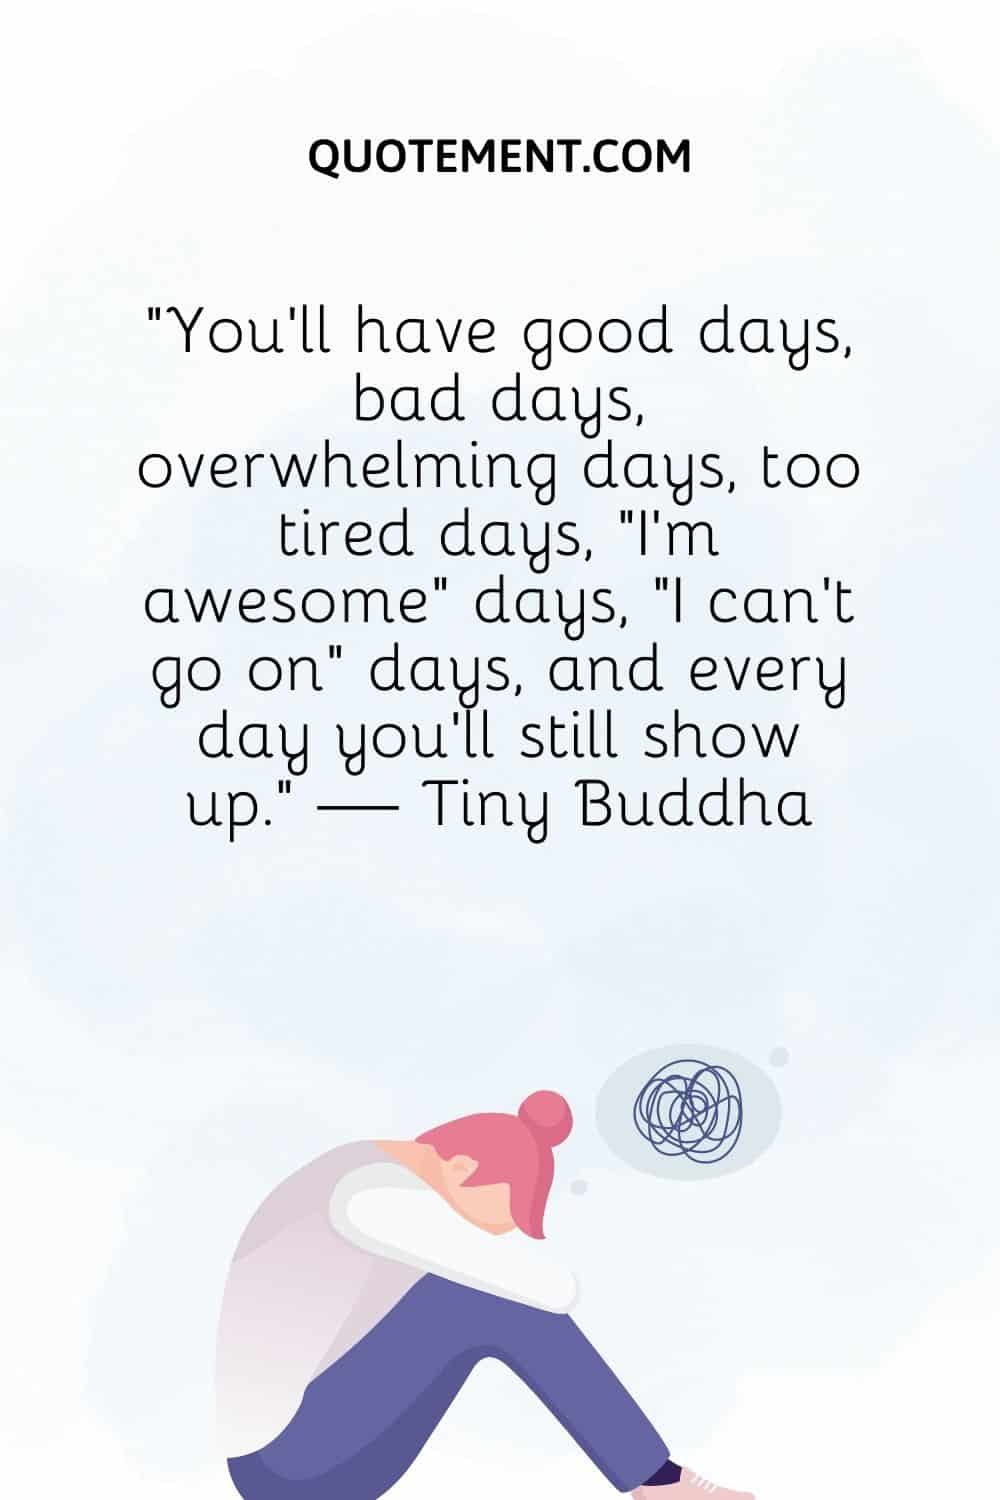 You’ll have good days, bad days, overwhelming days, too tired days, “I’m awesome” days, “I can’t go on” days, and every day you’ll still show up